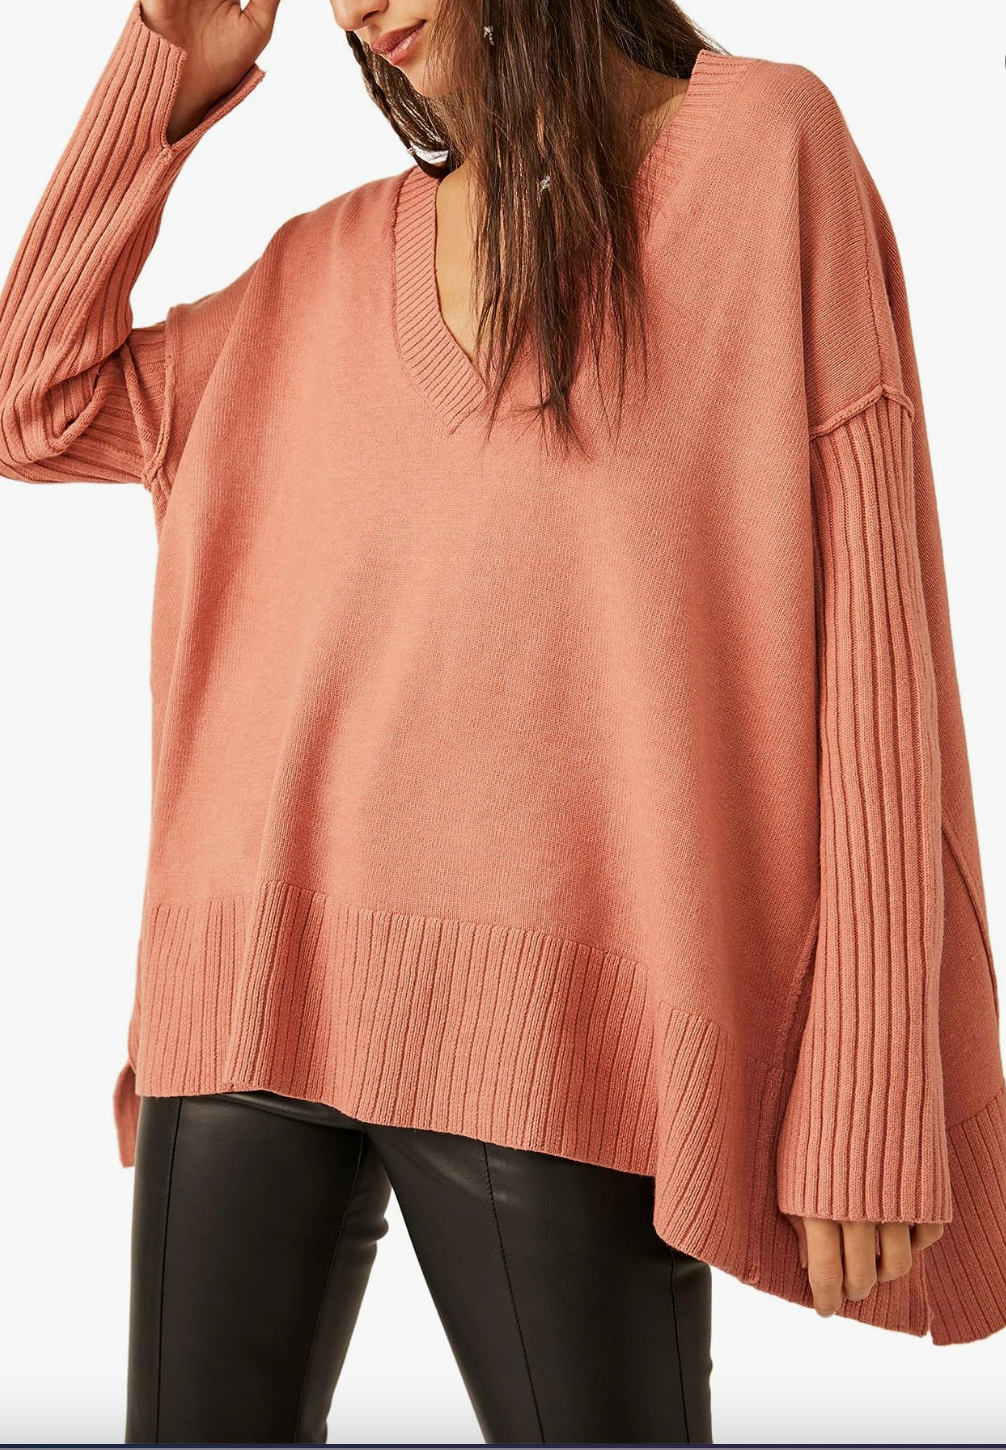 Orion A Line Tunic in Lightest Rose by Free People - Shop Wild Ivy